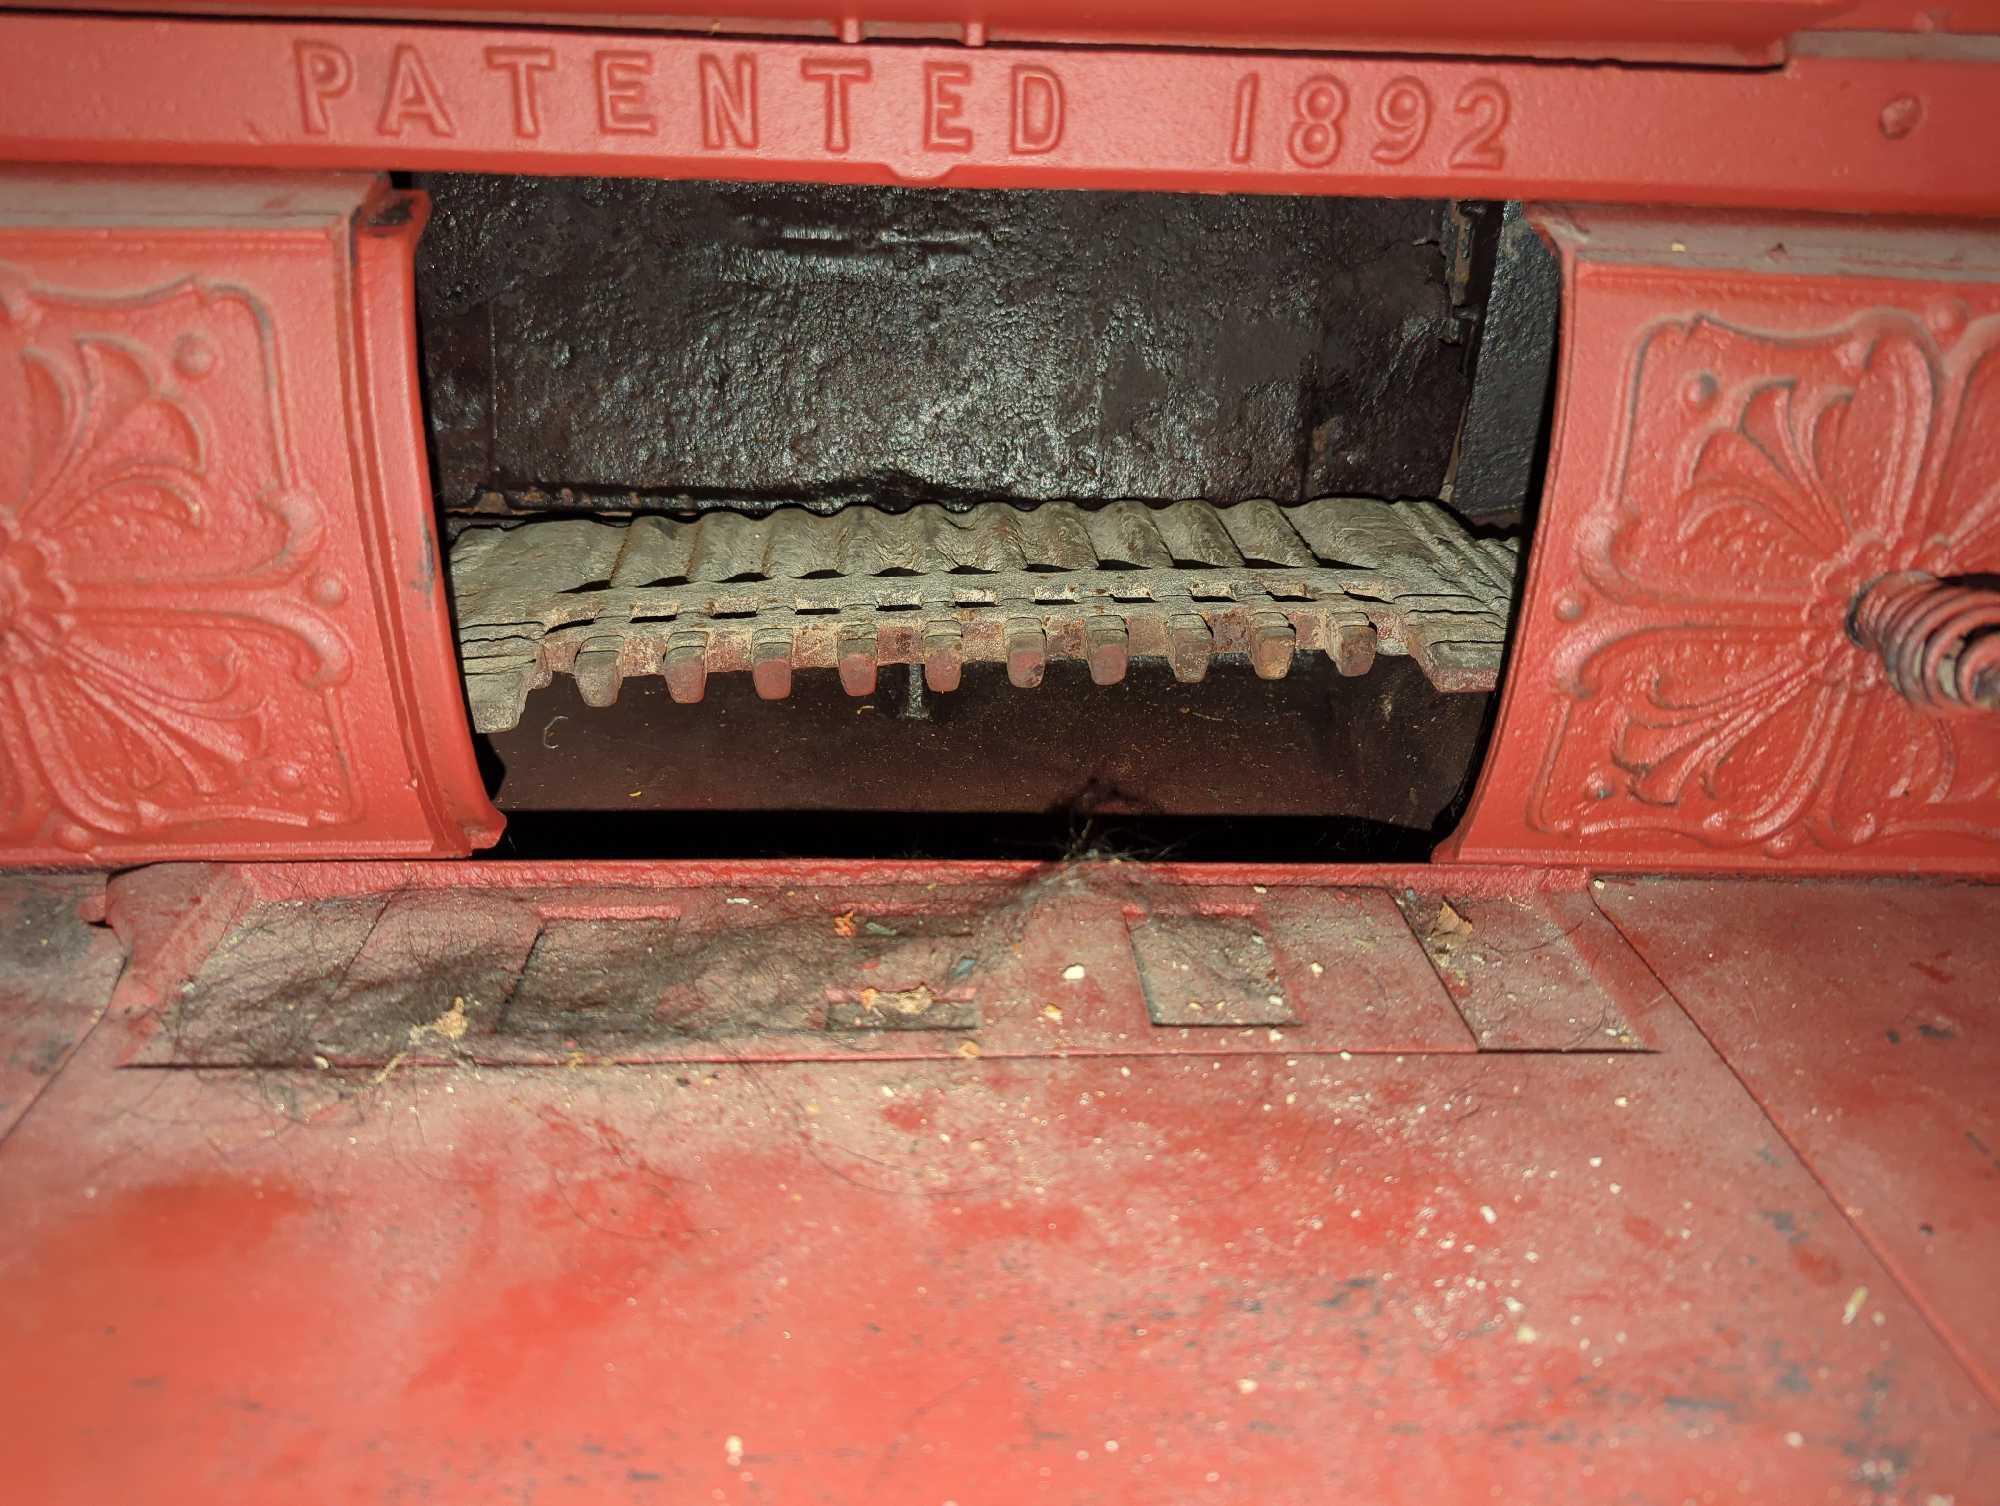 (KIT) PLEASE BRING HELP TO LOAD THIS ITEM, NEW EXCELSIOR COOK CAST IRON RED EARLY STYLE STOVE 128-C,